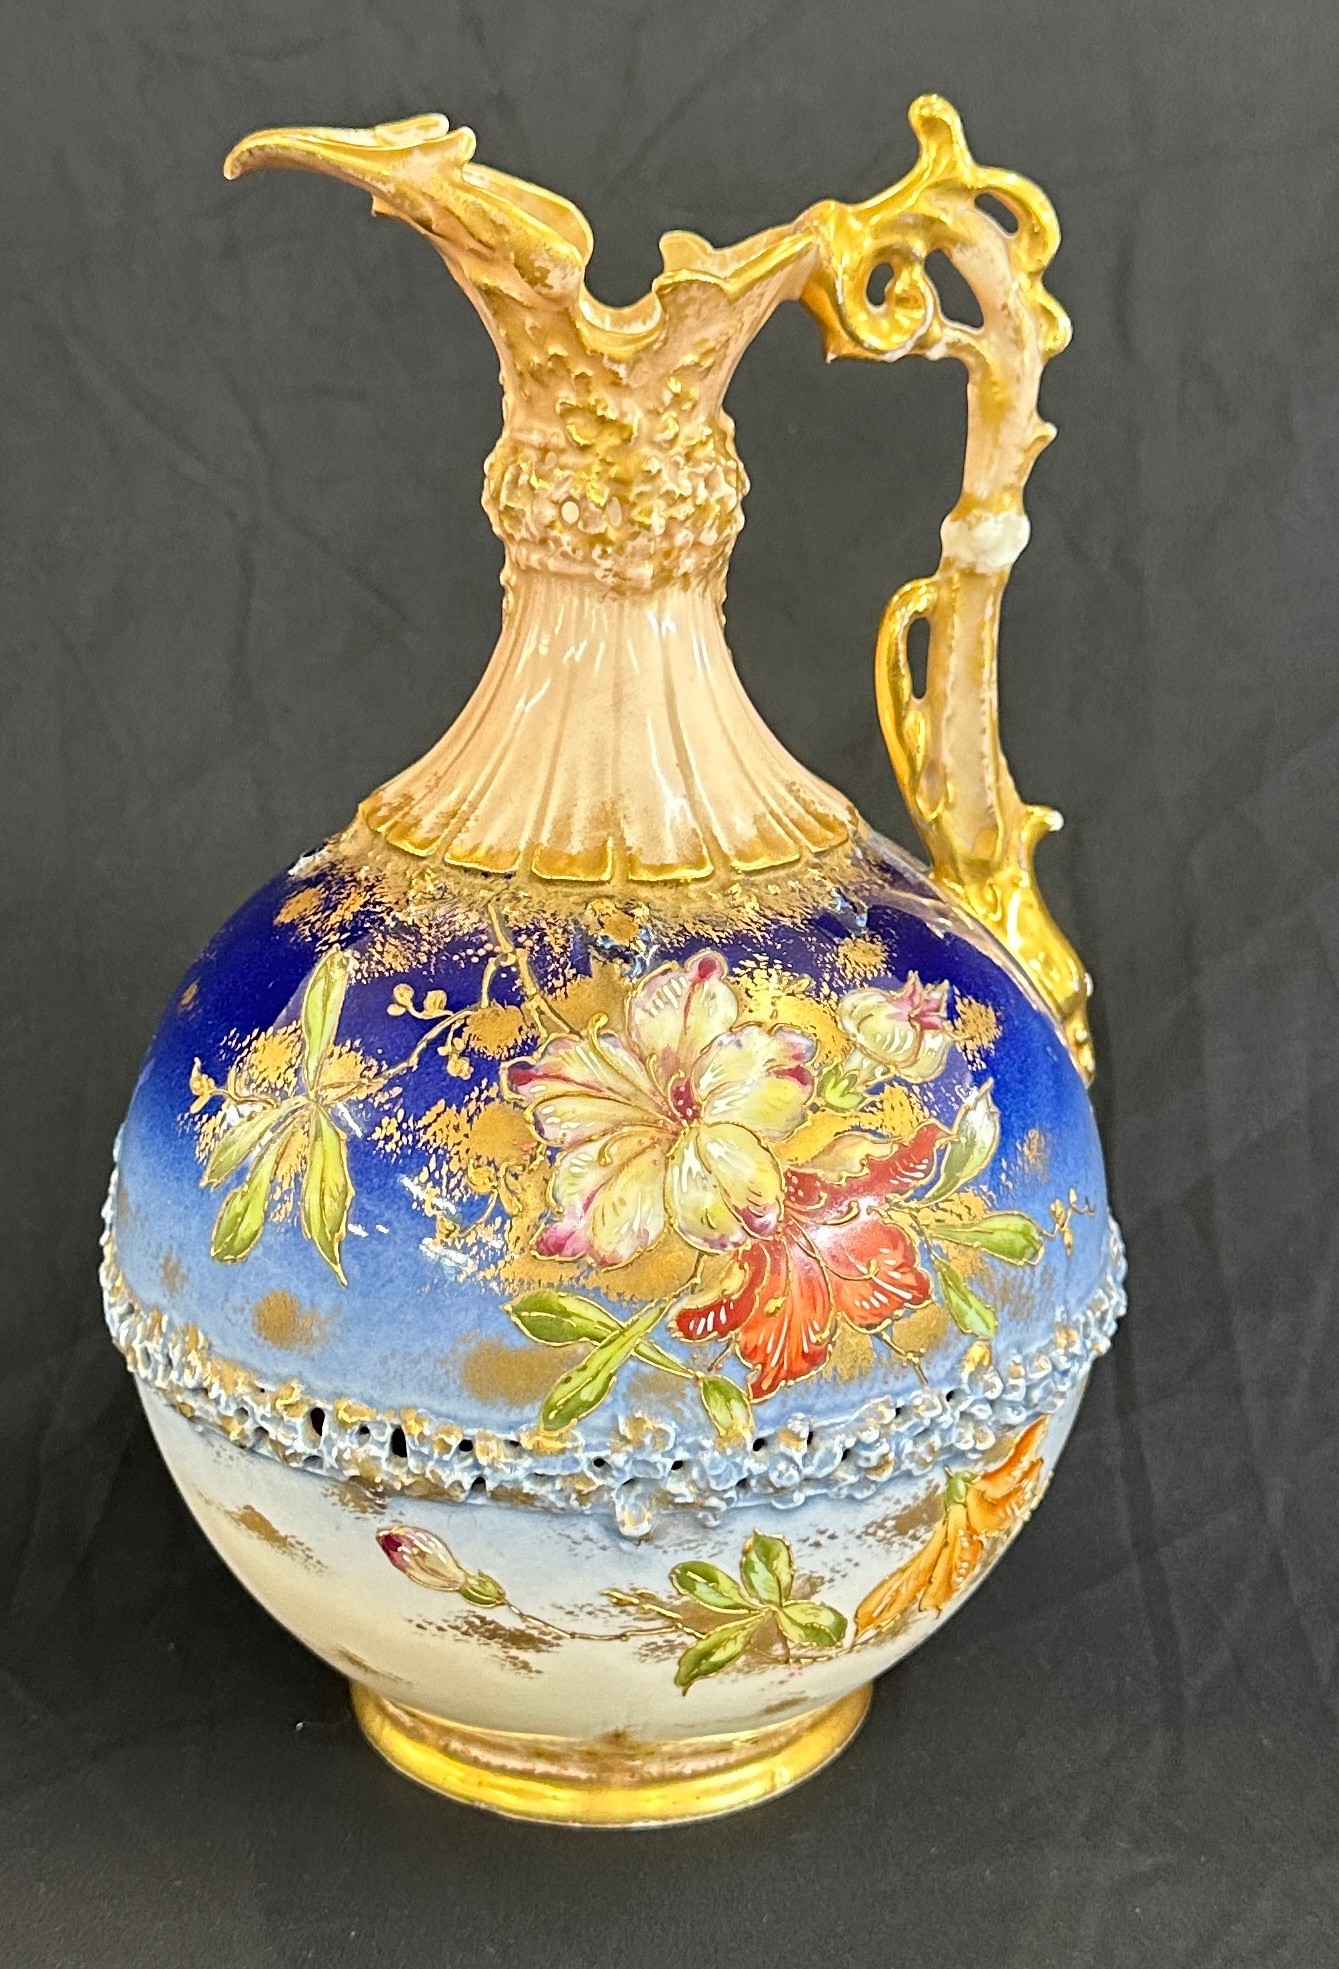 Wien Teplits hand painted jug height 9.5 inches tall